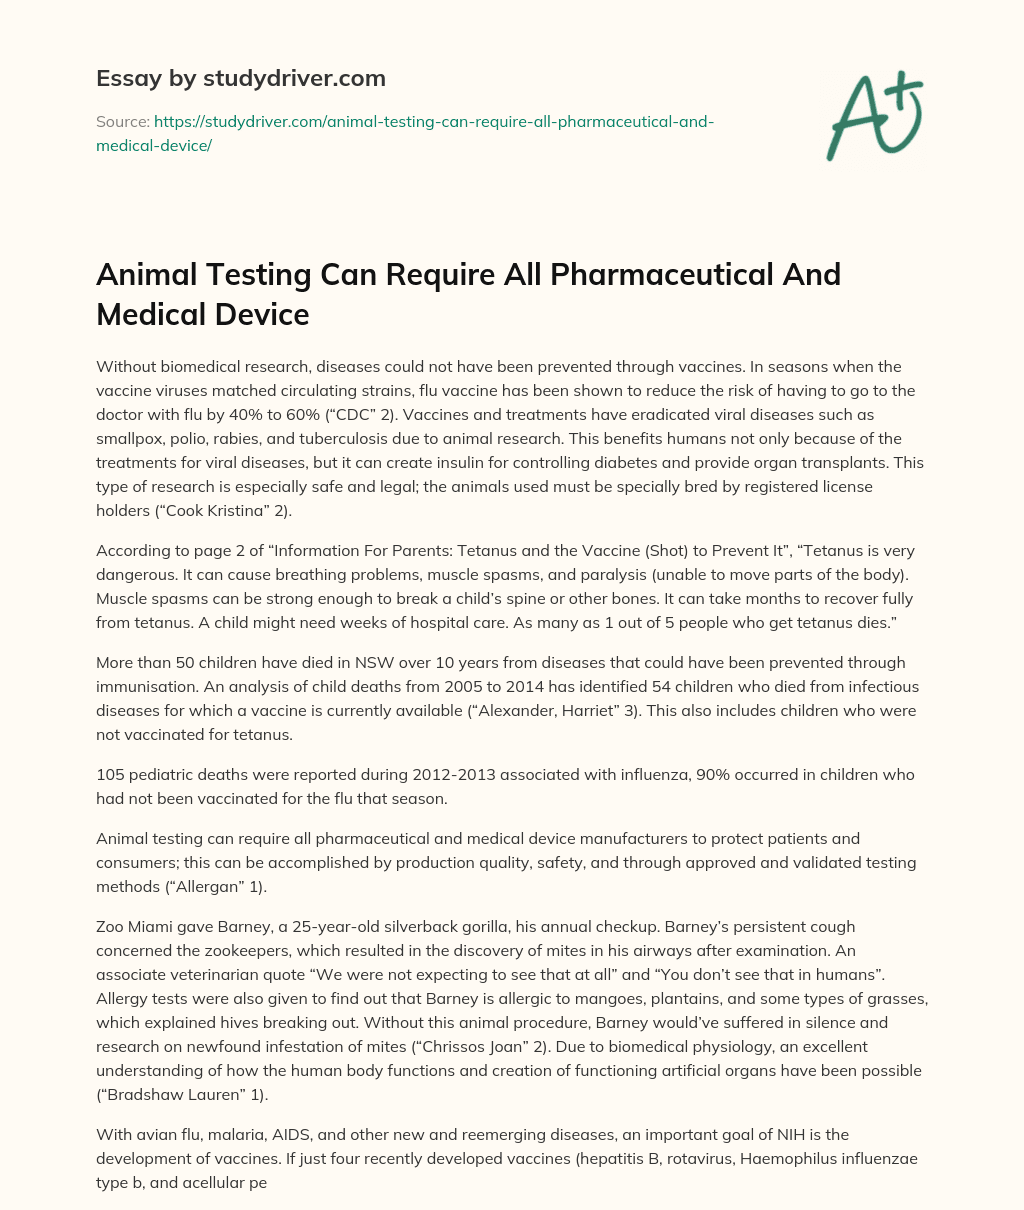 Animal Testing Can Require all Pharmaceutical and Medical Device essay